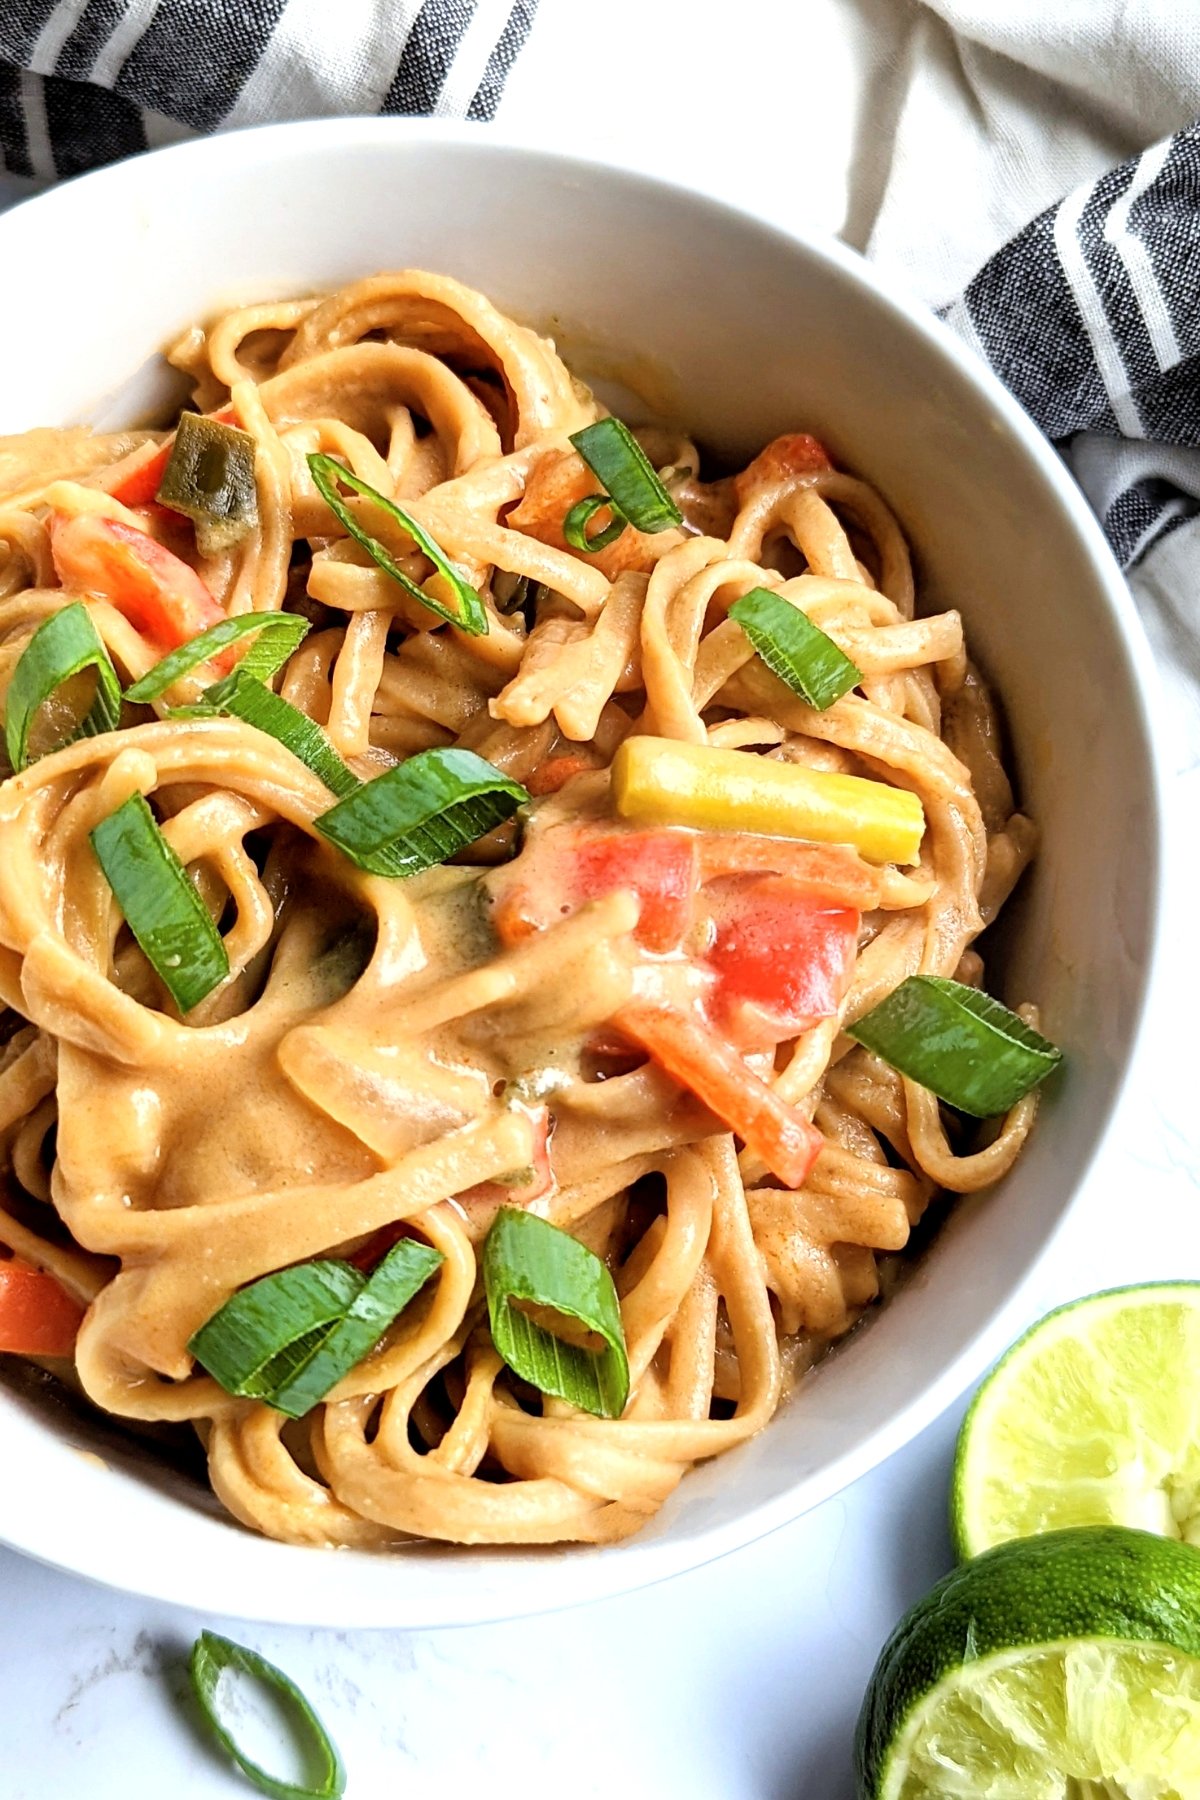 low sodium noodles with peanut sauce recipe healthy pressure cooker peanut noodles with satay sauce vegan vegetarian